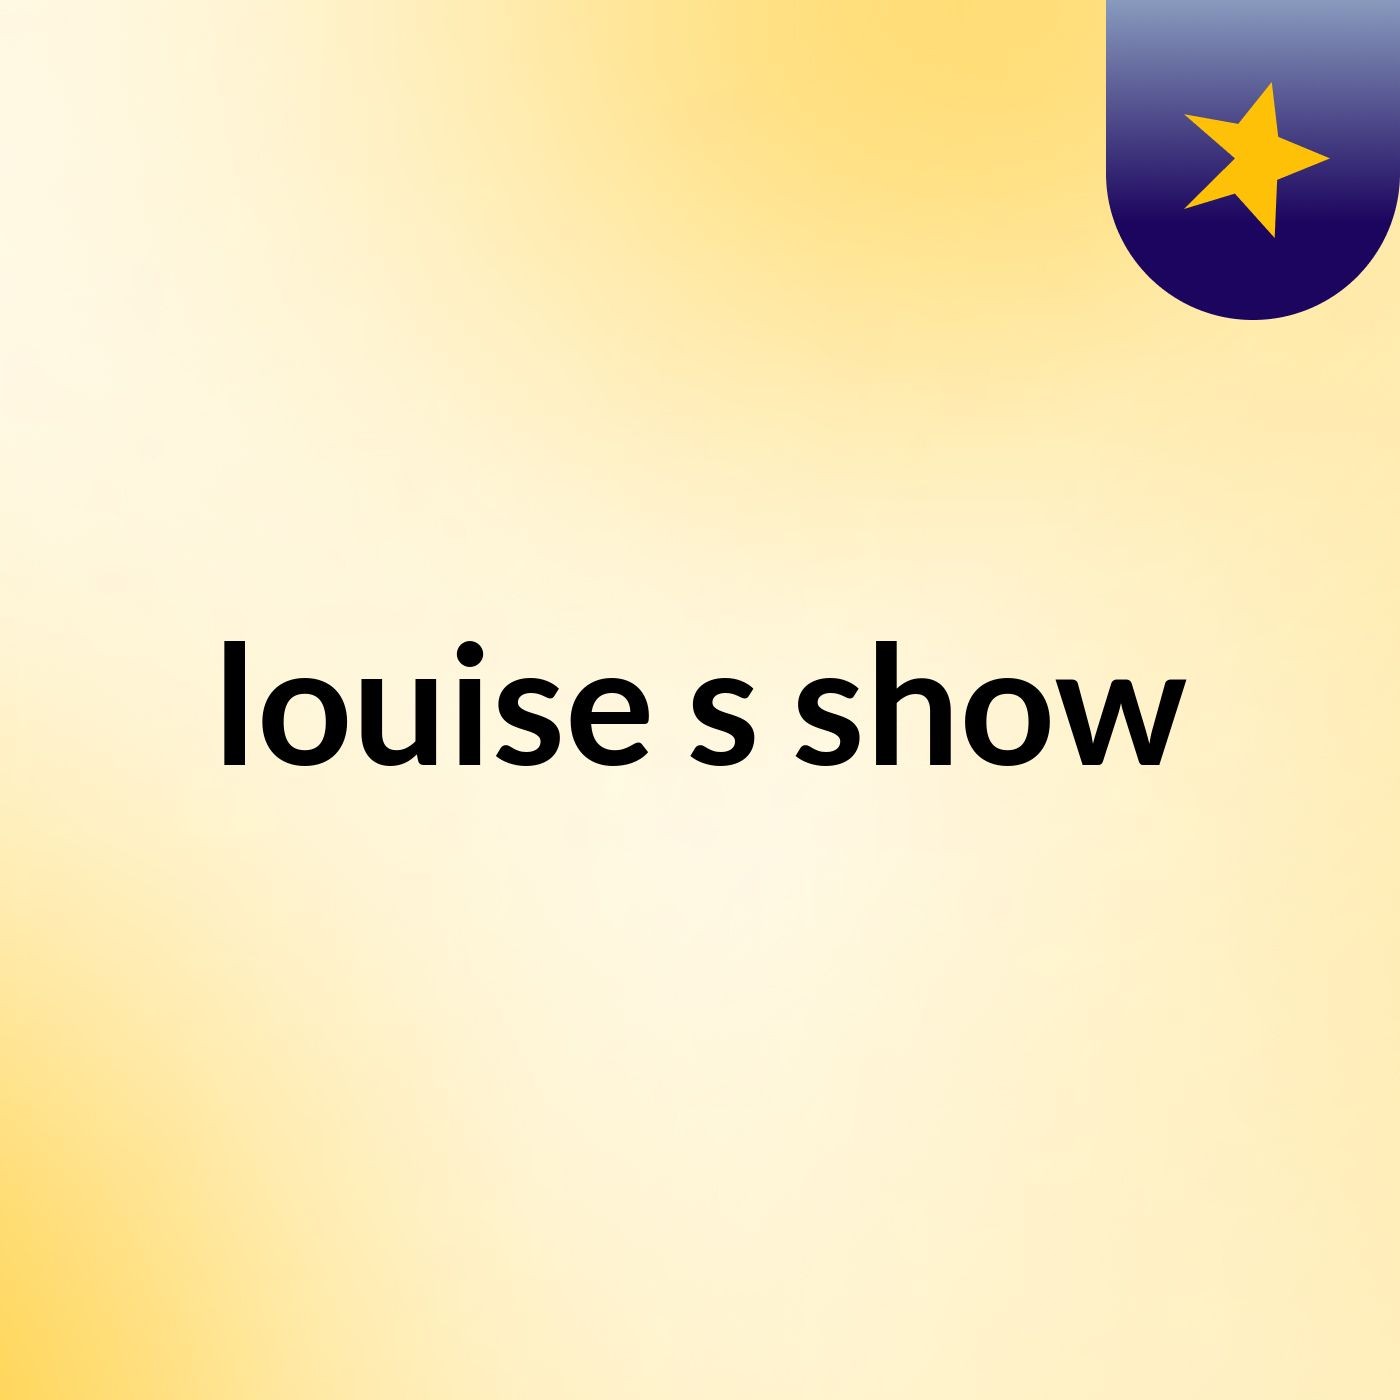 louise's show